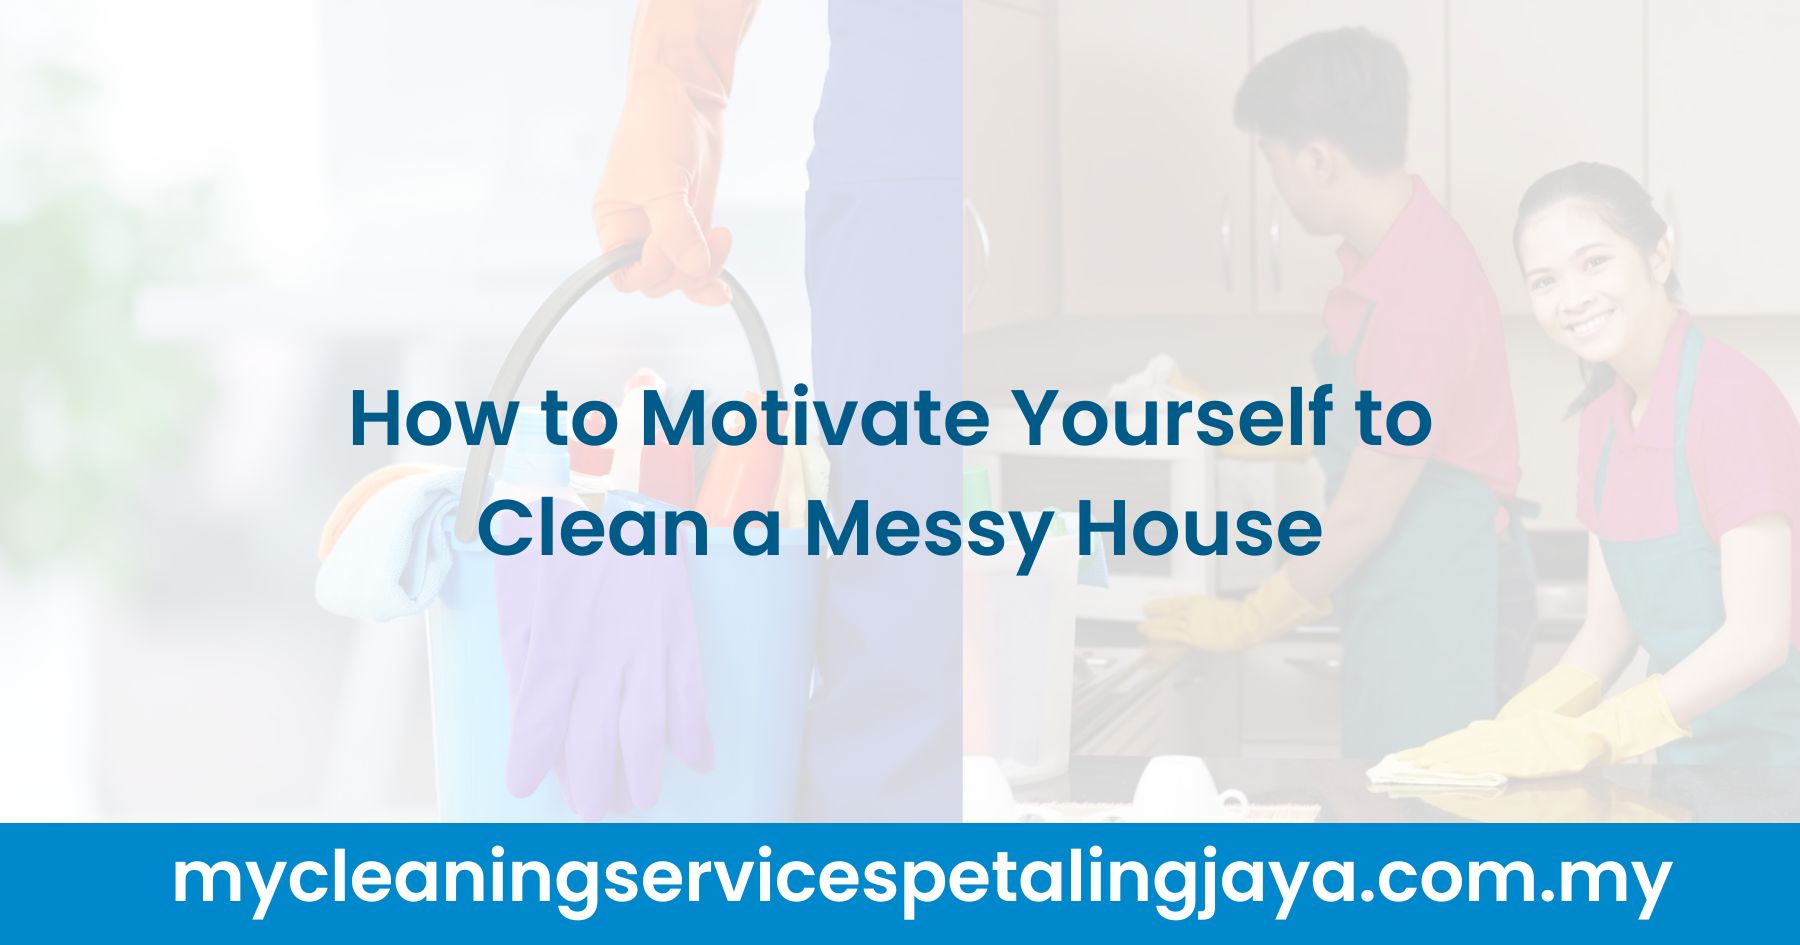 How to Motivate Yourself to Clean a Messy House